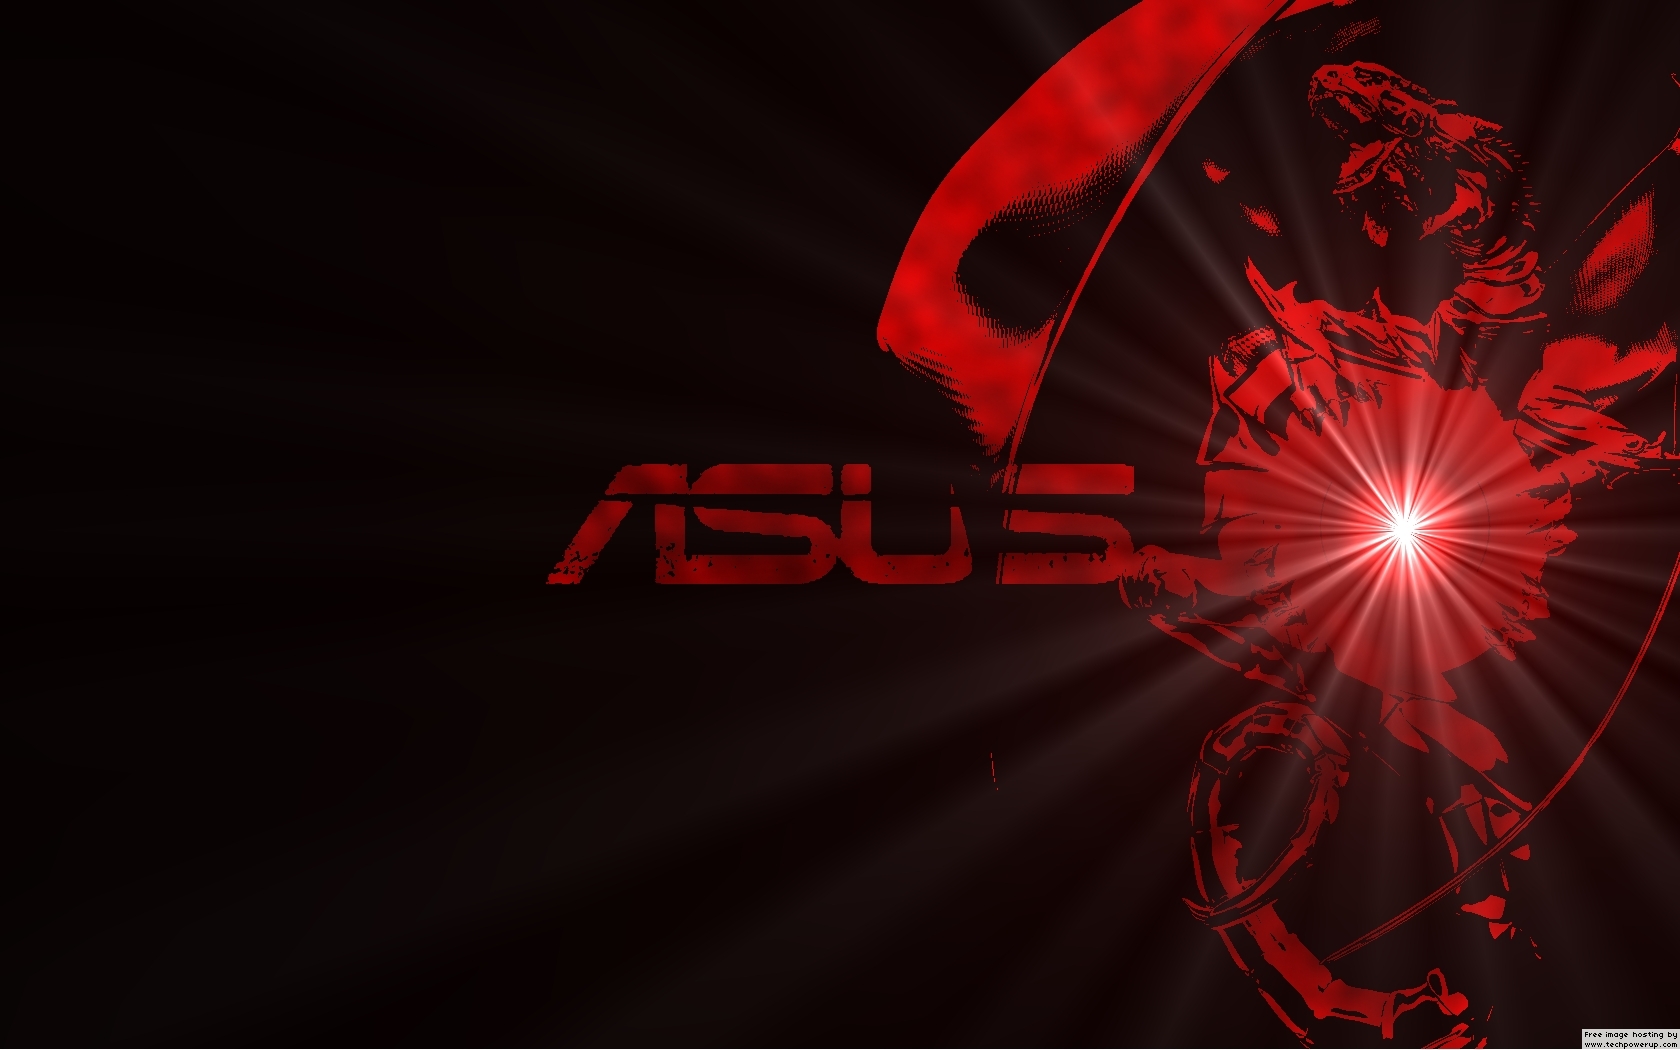 Asus Dragon Wallpaper I Made Nothing Special Could Use Allot More